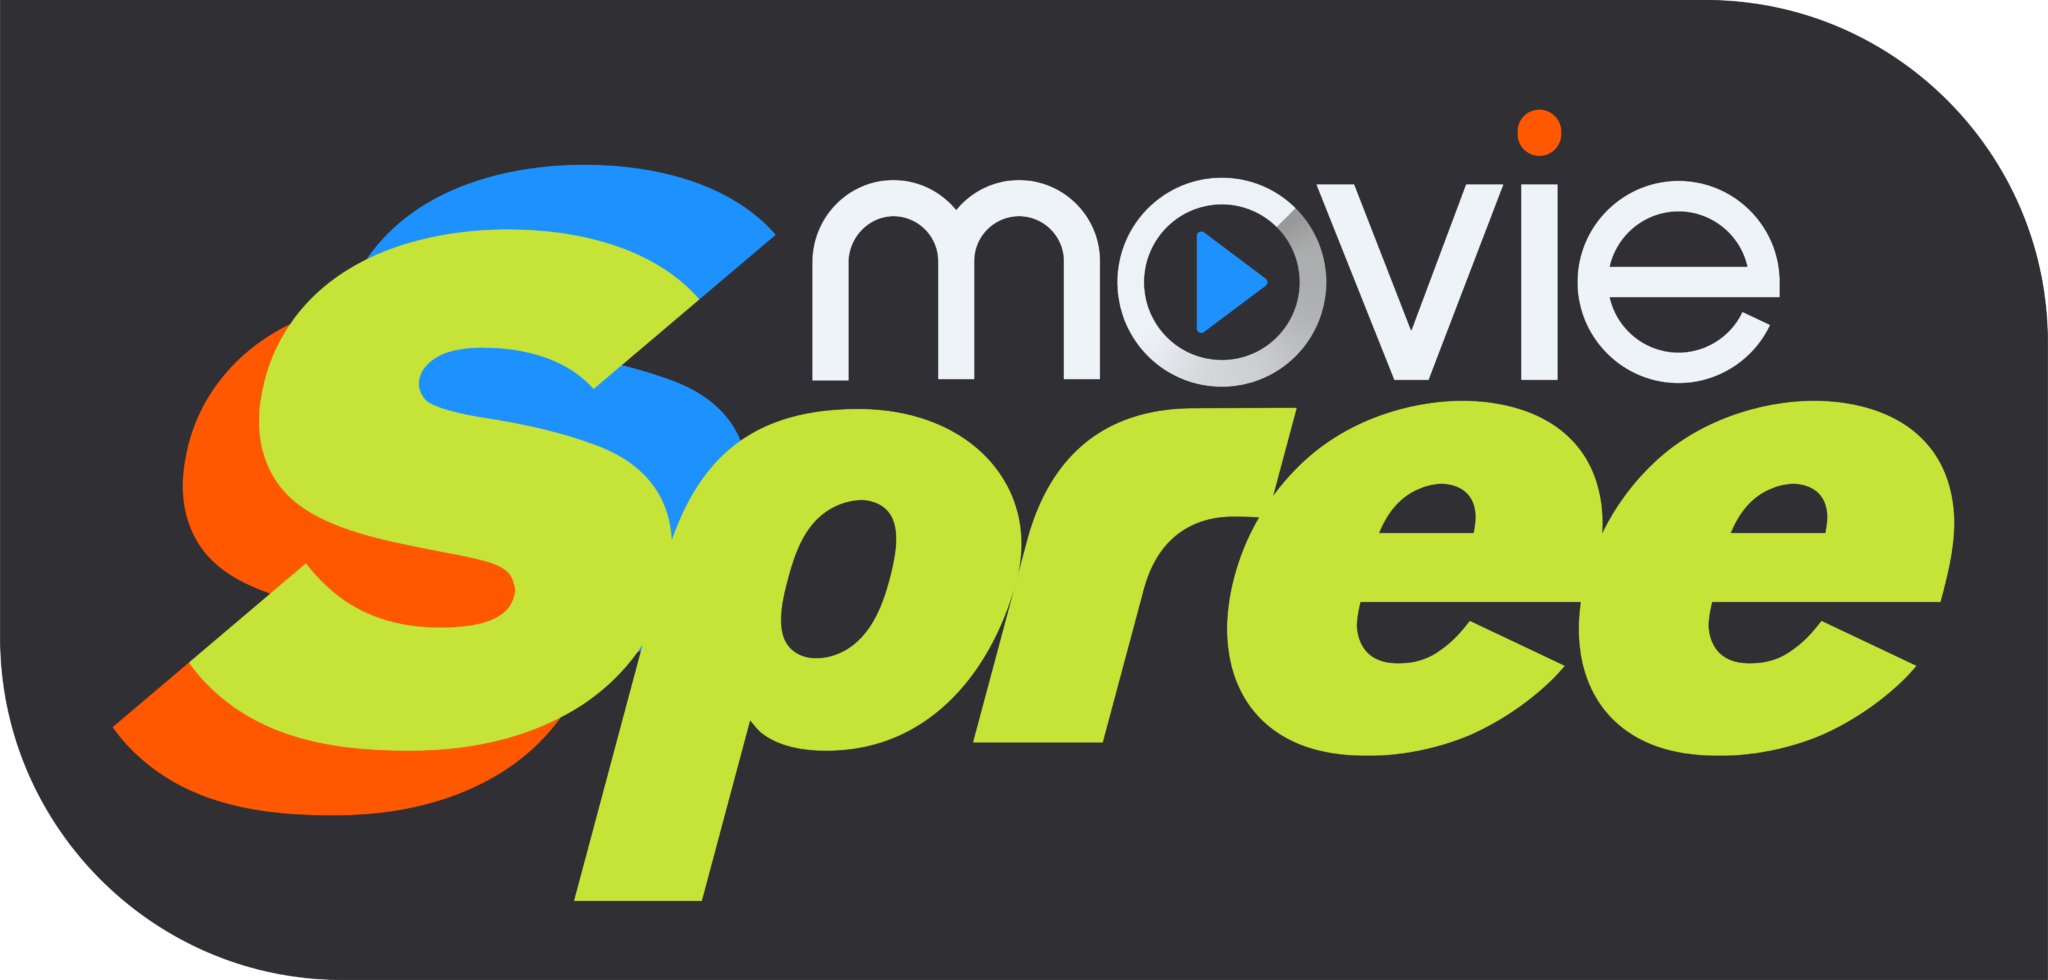 MovieSpree is Offering 100 Free Movies on Roku, Apple TV, and Amazon Fire TV if You Signup Now